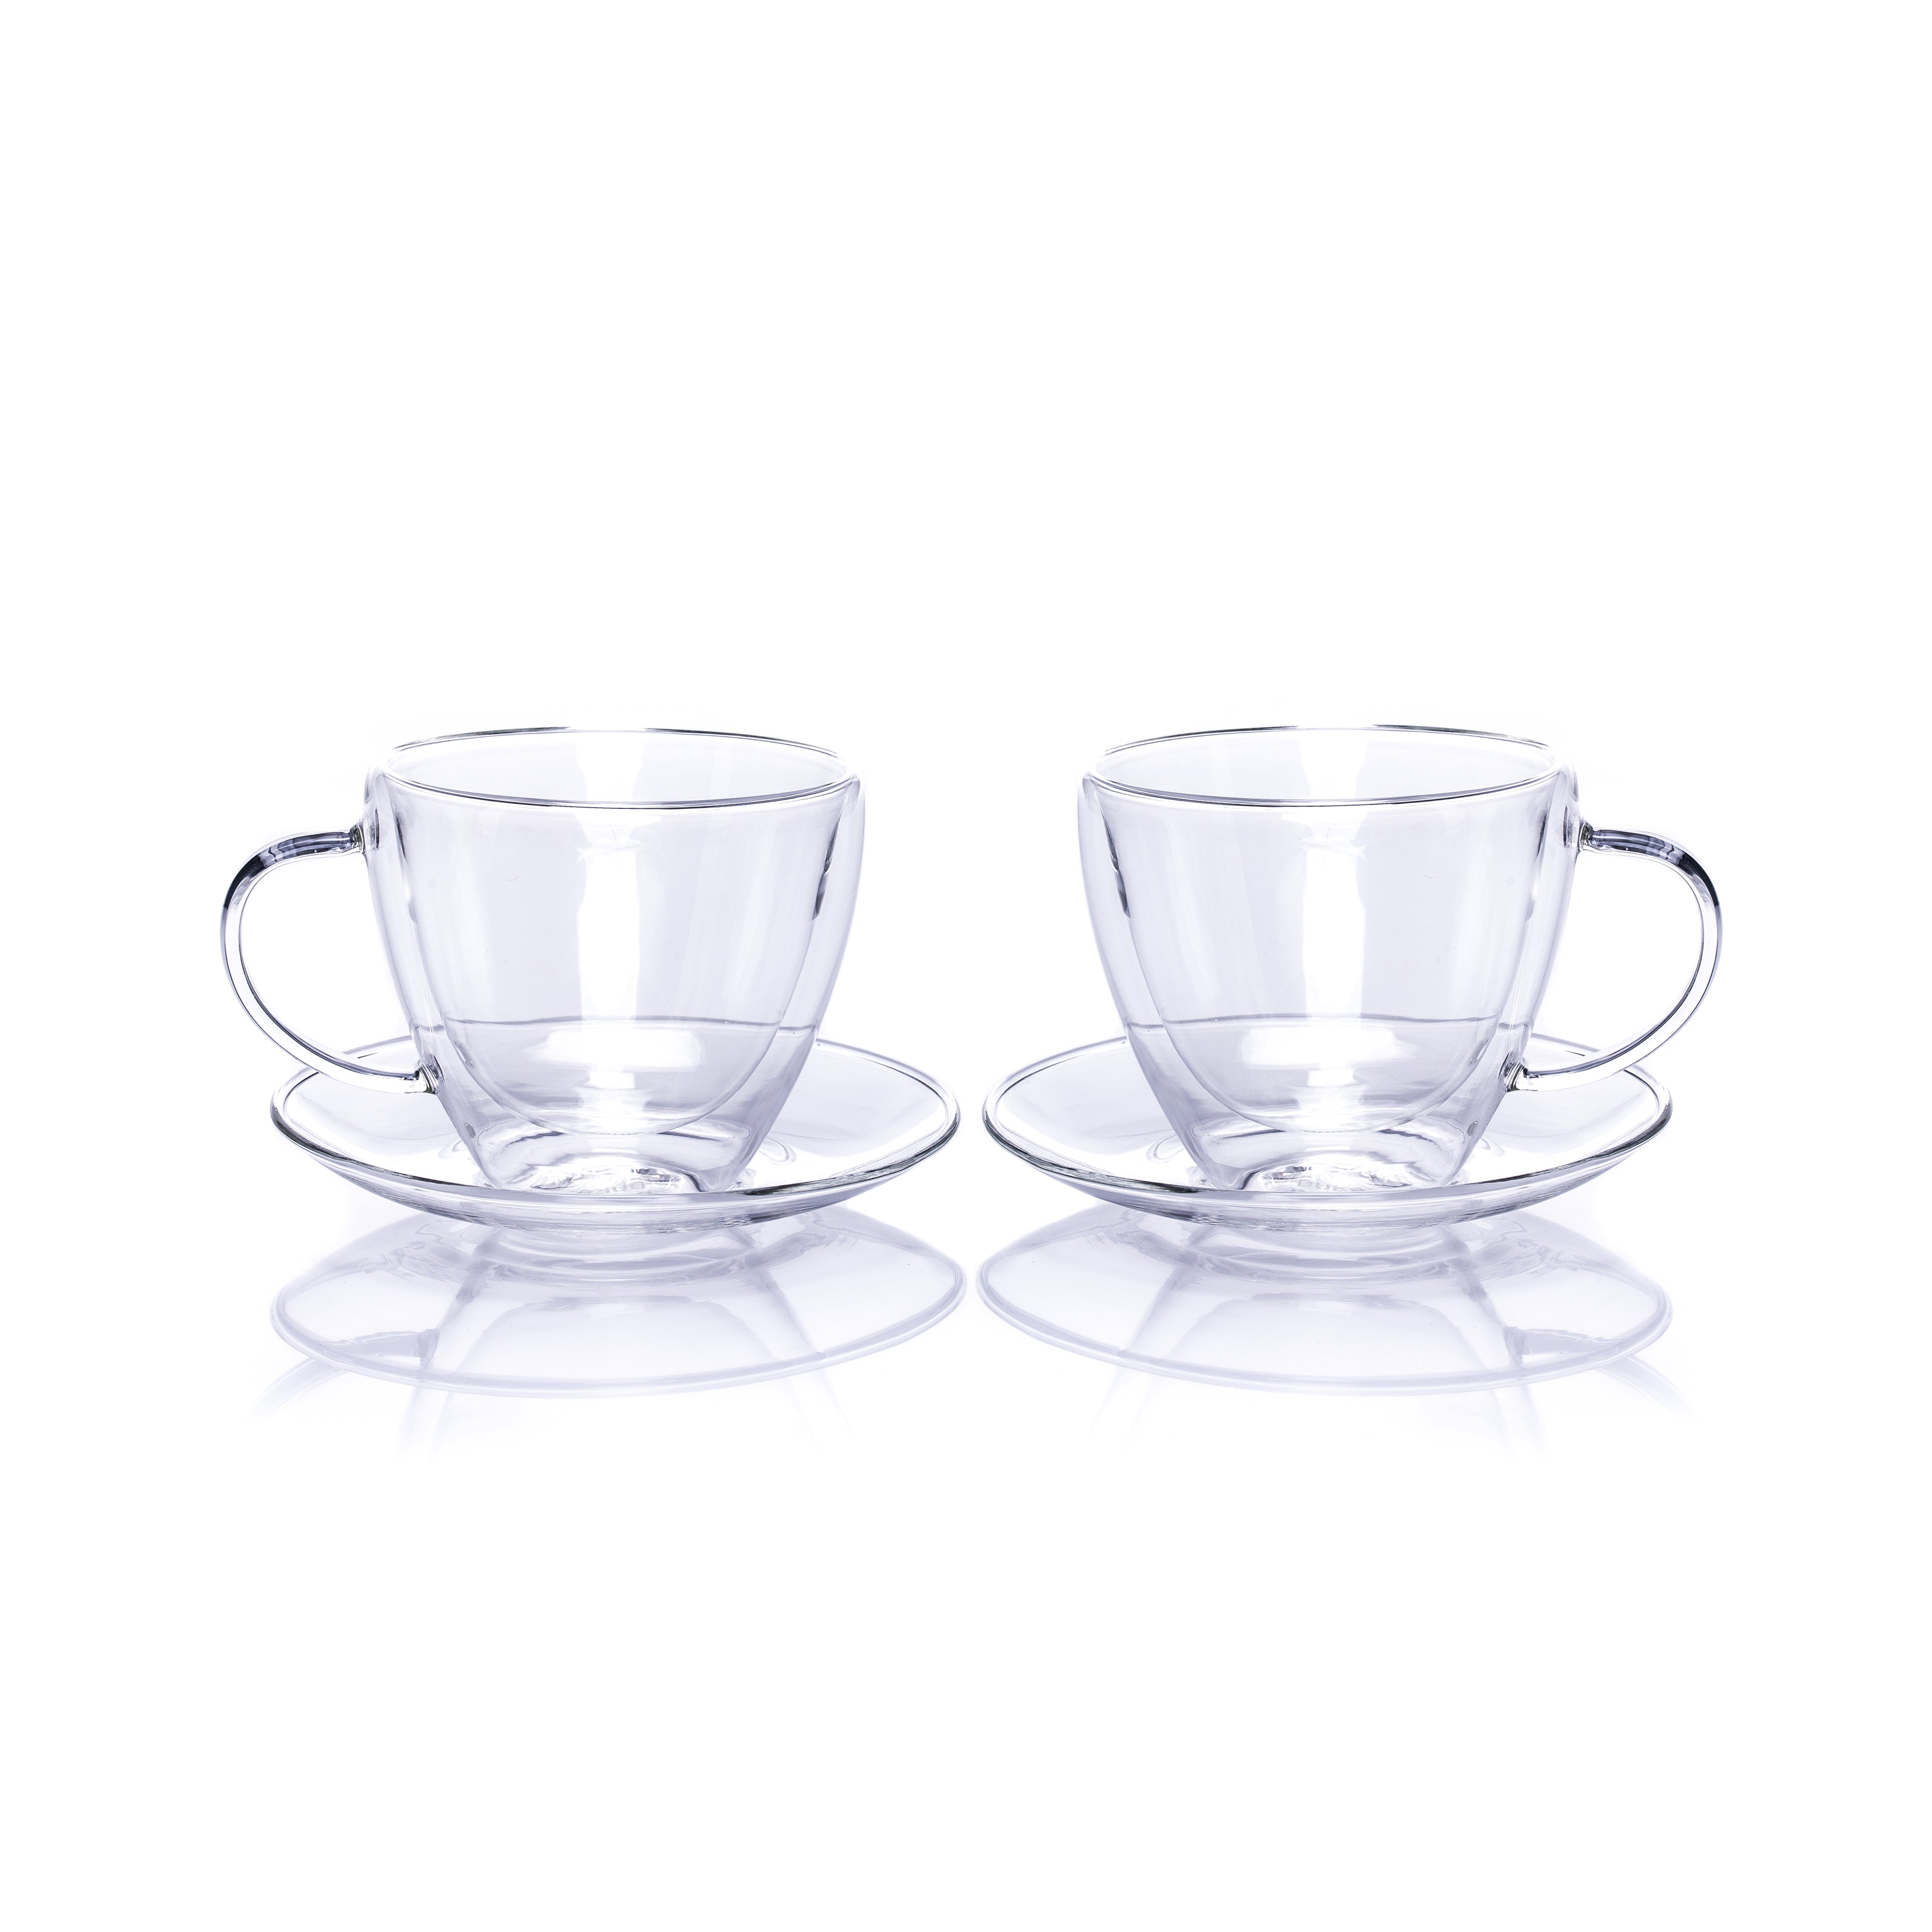 Pair of Two Espresso Glasses & Saucers